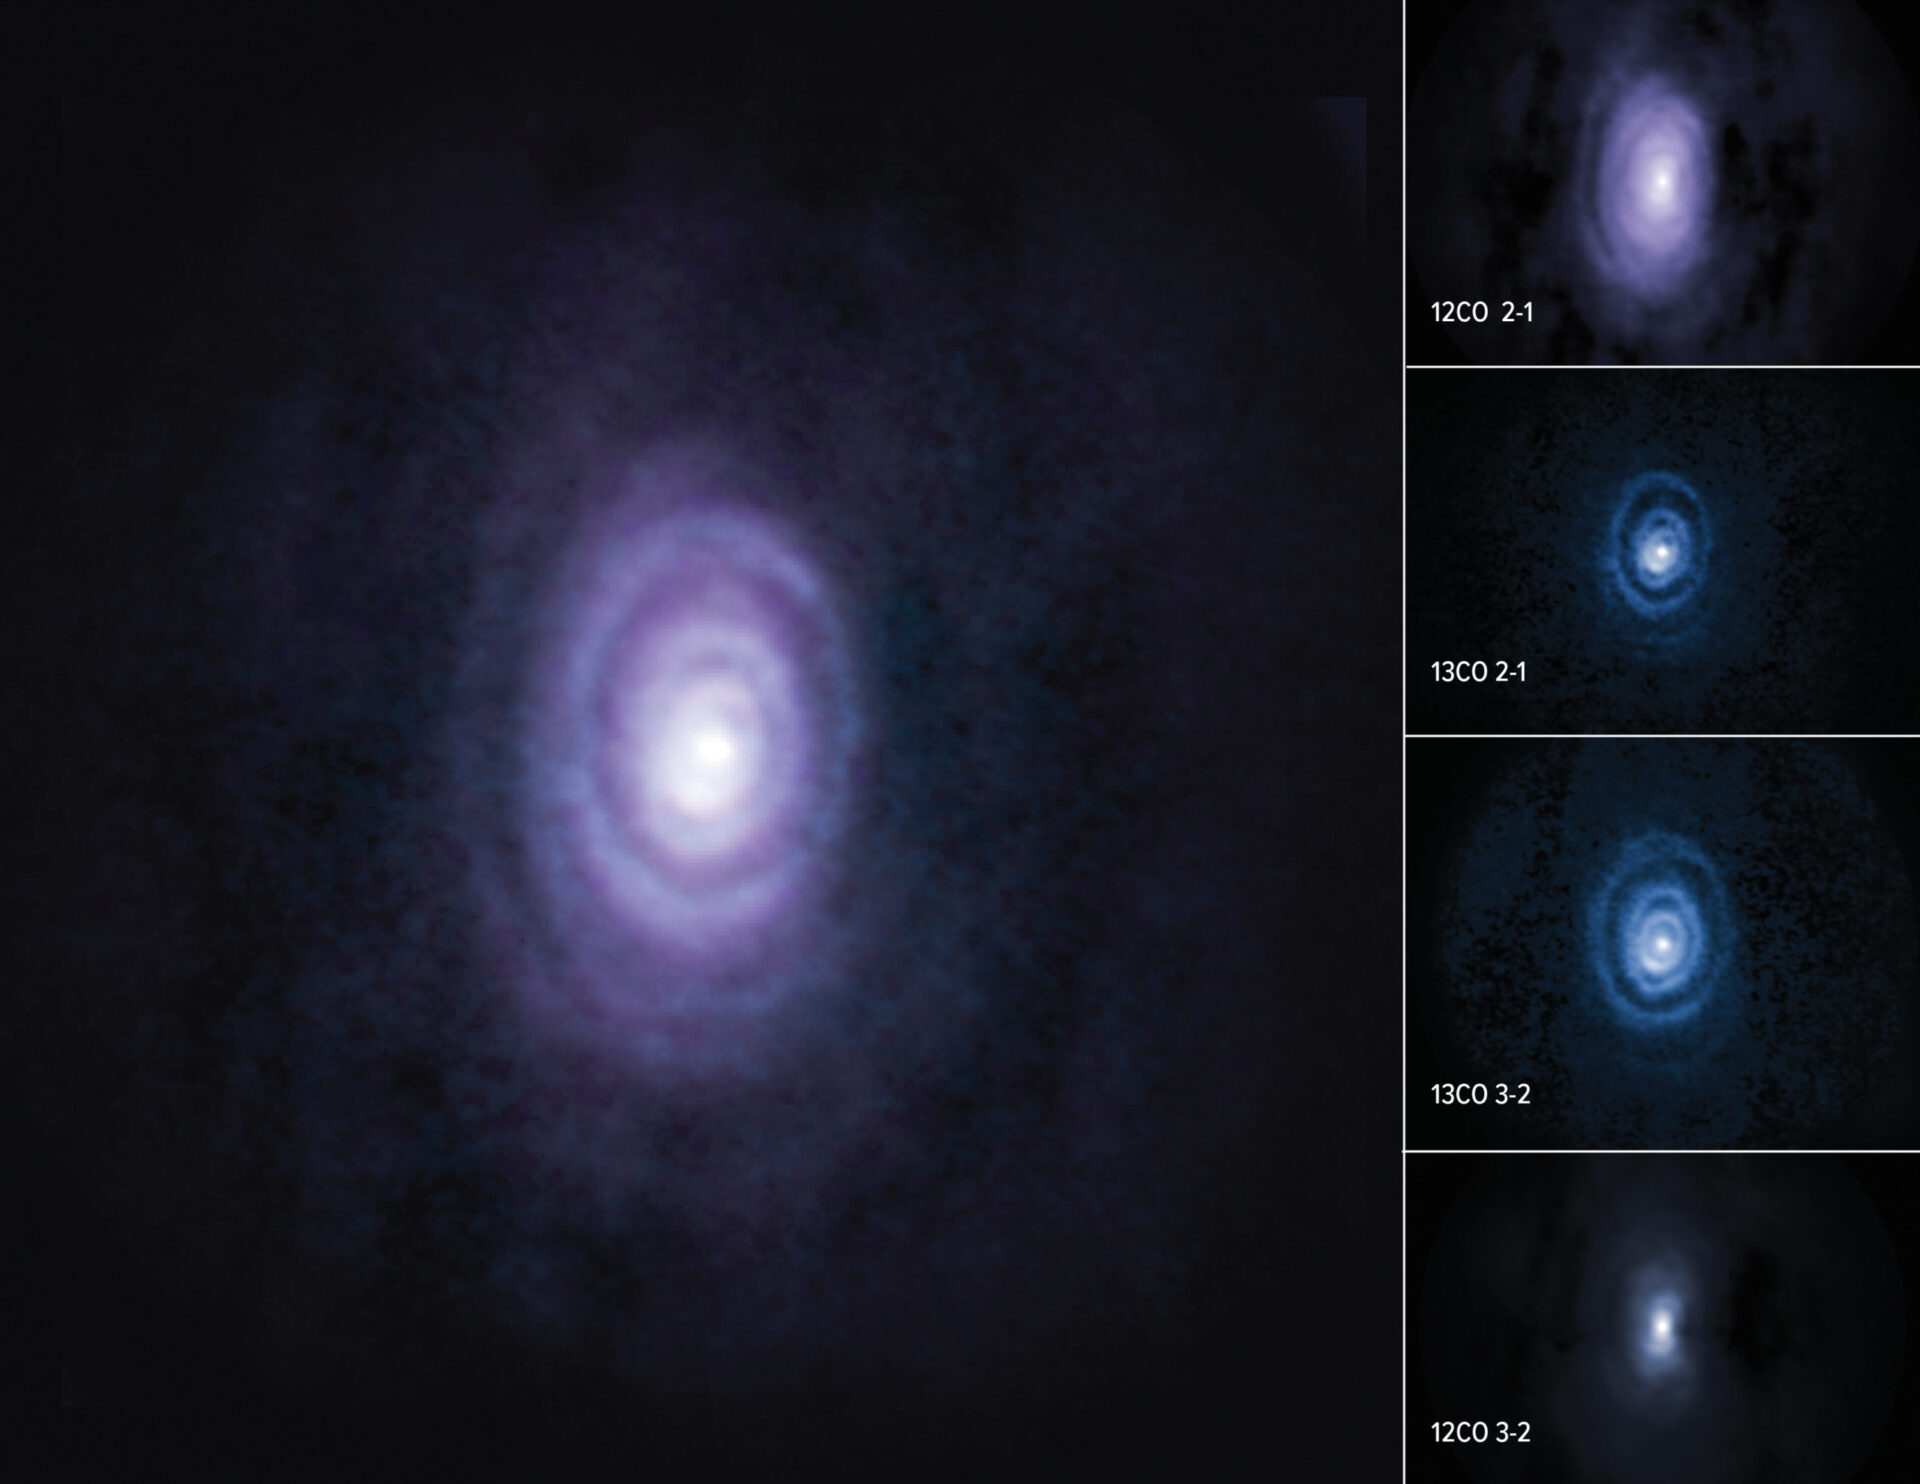 <p>Scientists studying the dying carbon-rich star V Hya have discovered six slowly expanding rings forming as the star expels its matter. Shown here in composite, these outflowing rings and the diffuse arc structure of the sixth ring are moderately visible in the 12CO carbon isotope emission line, and become well-defined in views of the 13CO carbon isotopes. These rings are part of a previously unknown story about the death of stars, and are helping scientists to unravel what happens in the “final act.” Credit: ALMA (ESO/NAOJ/NRAO)/S. Dagnello (NRAO/AUI/NSF)</p>
